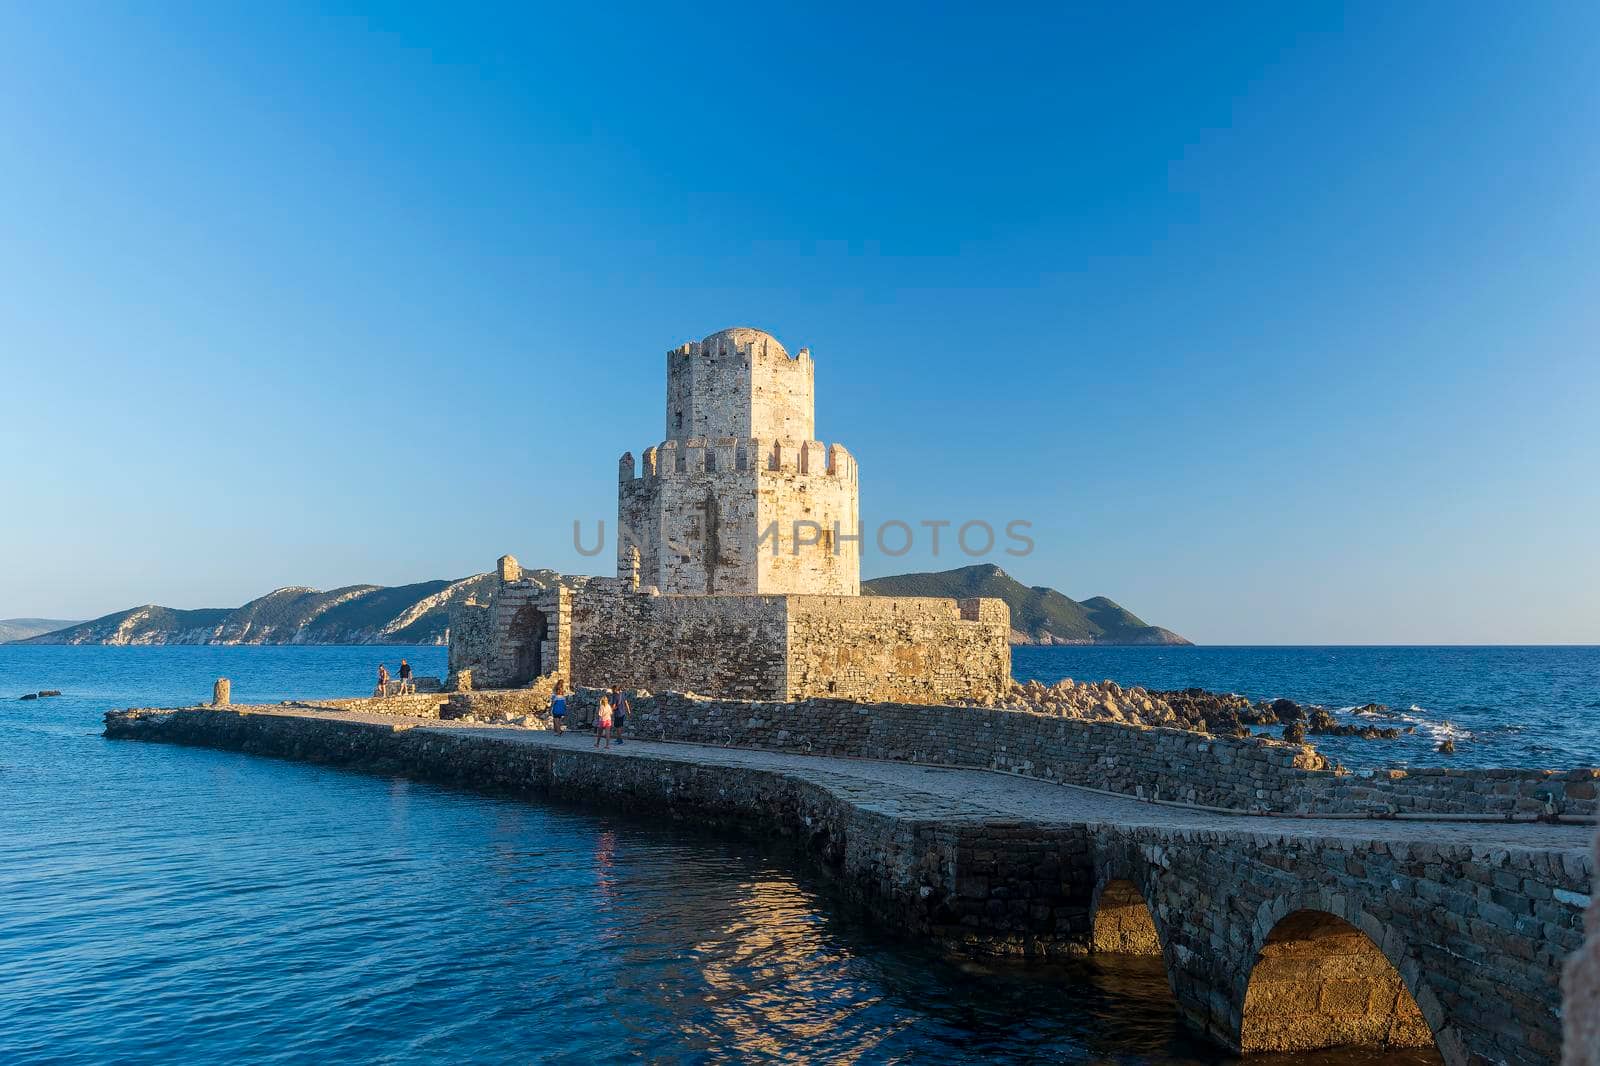 The Methoni Venetian Fortress in the Peloponnese, Messenia, Greece. by ankarb